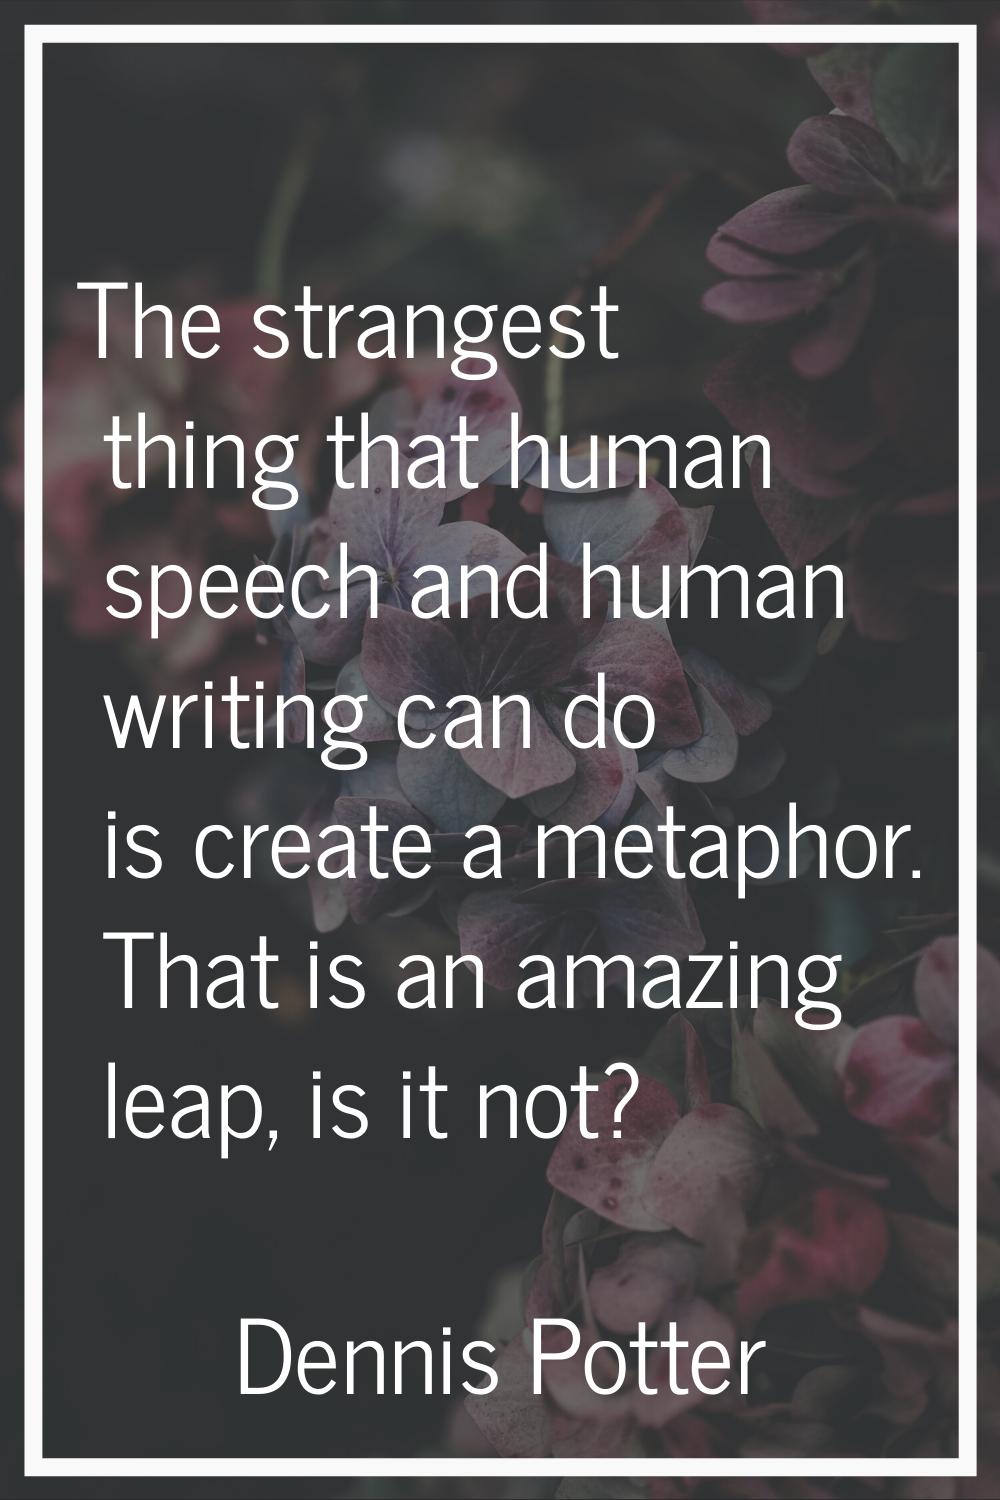 The strangest thing that human speech and human writing can do is create a metaphor. That is an ama